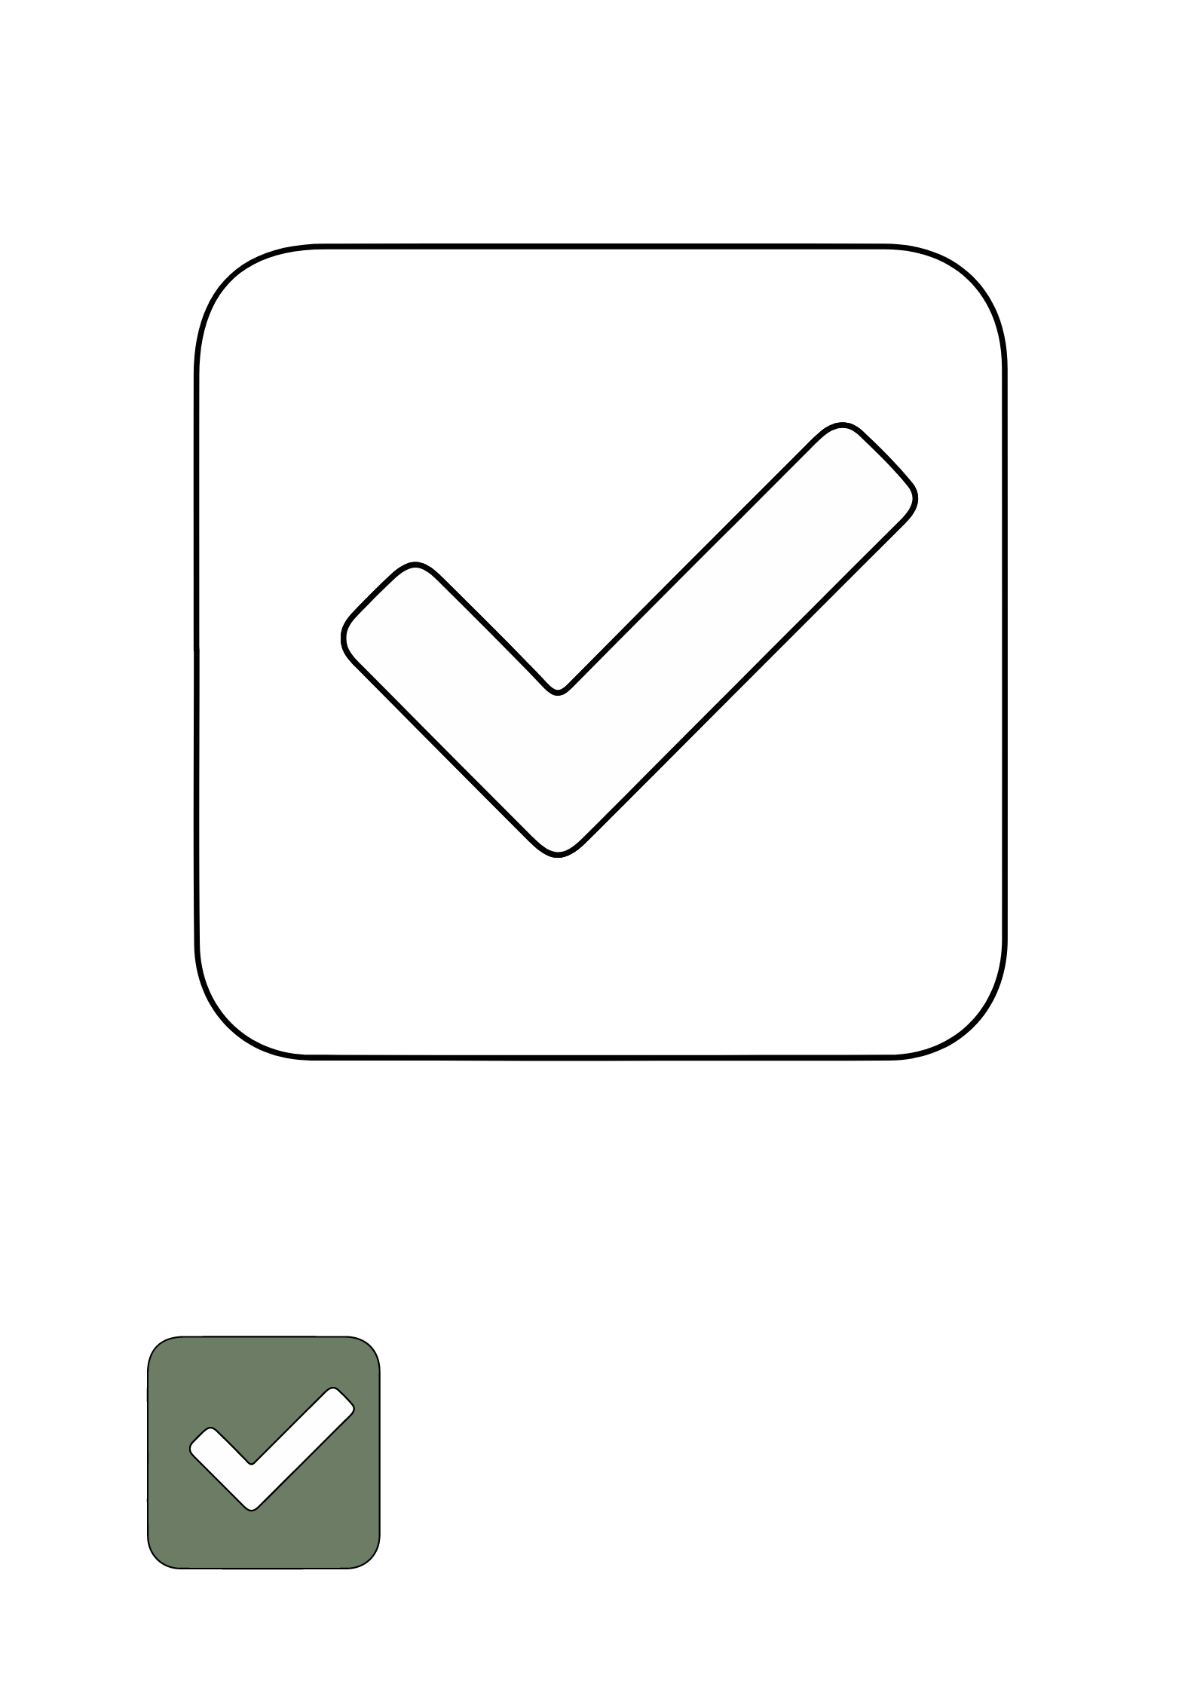 Flat Check Mark coloring page Template